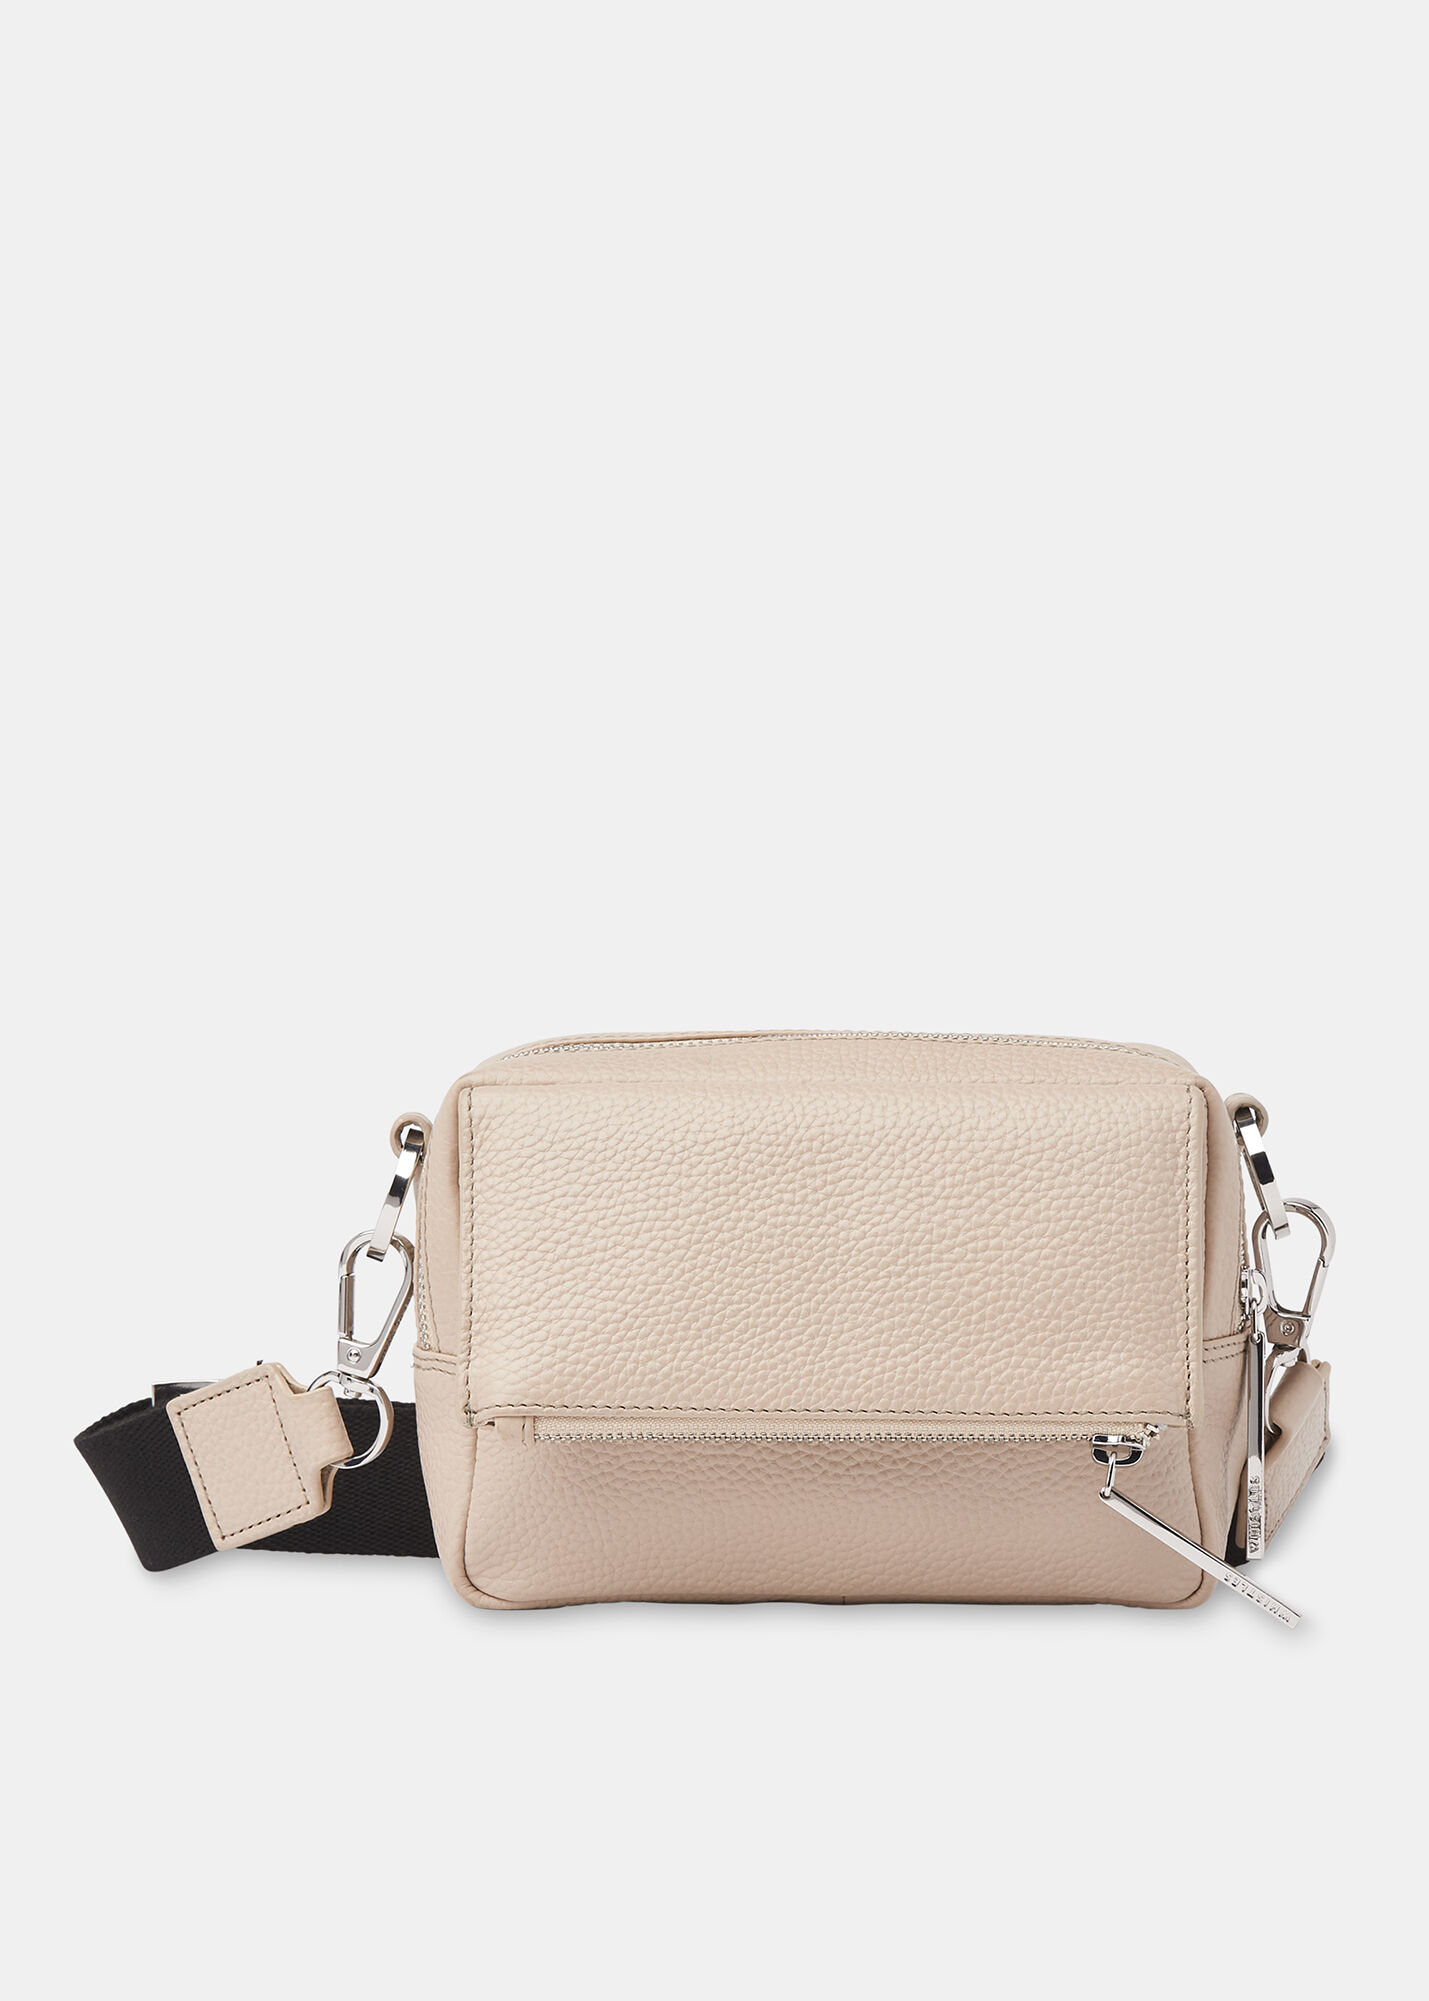 Women's Purses, Clutches, Totes & Wallets | Whistles US |